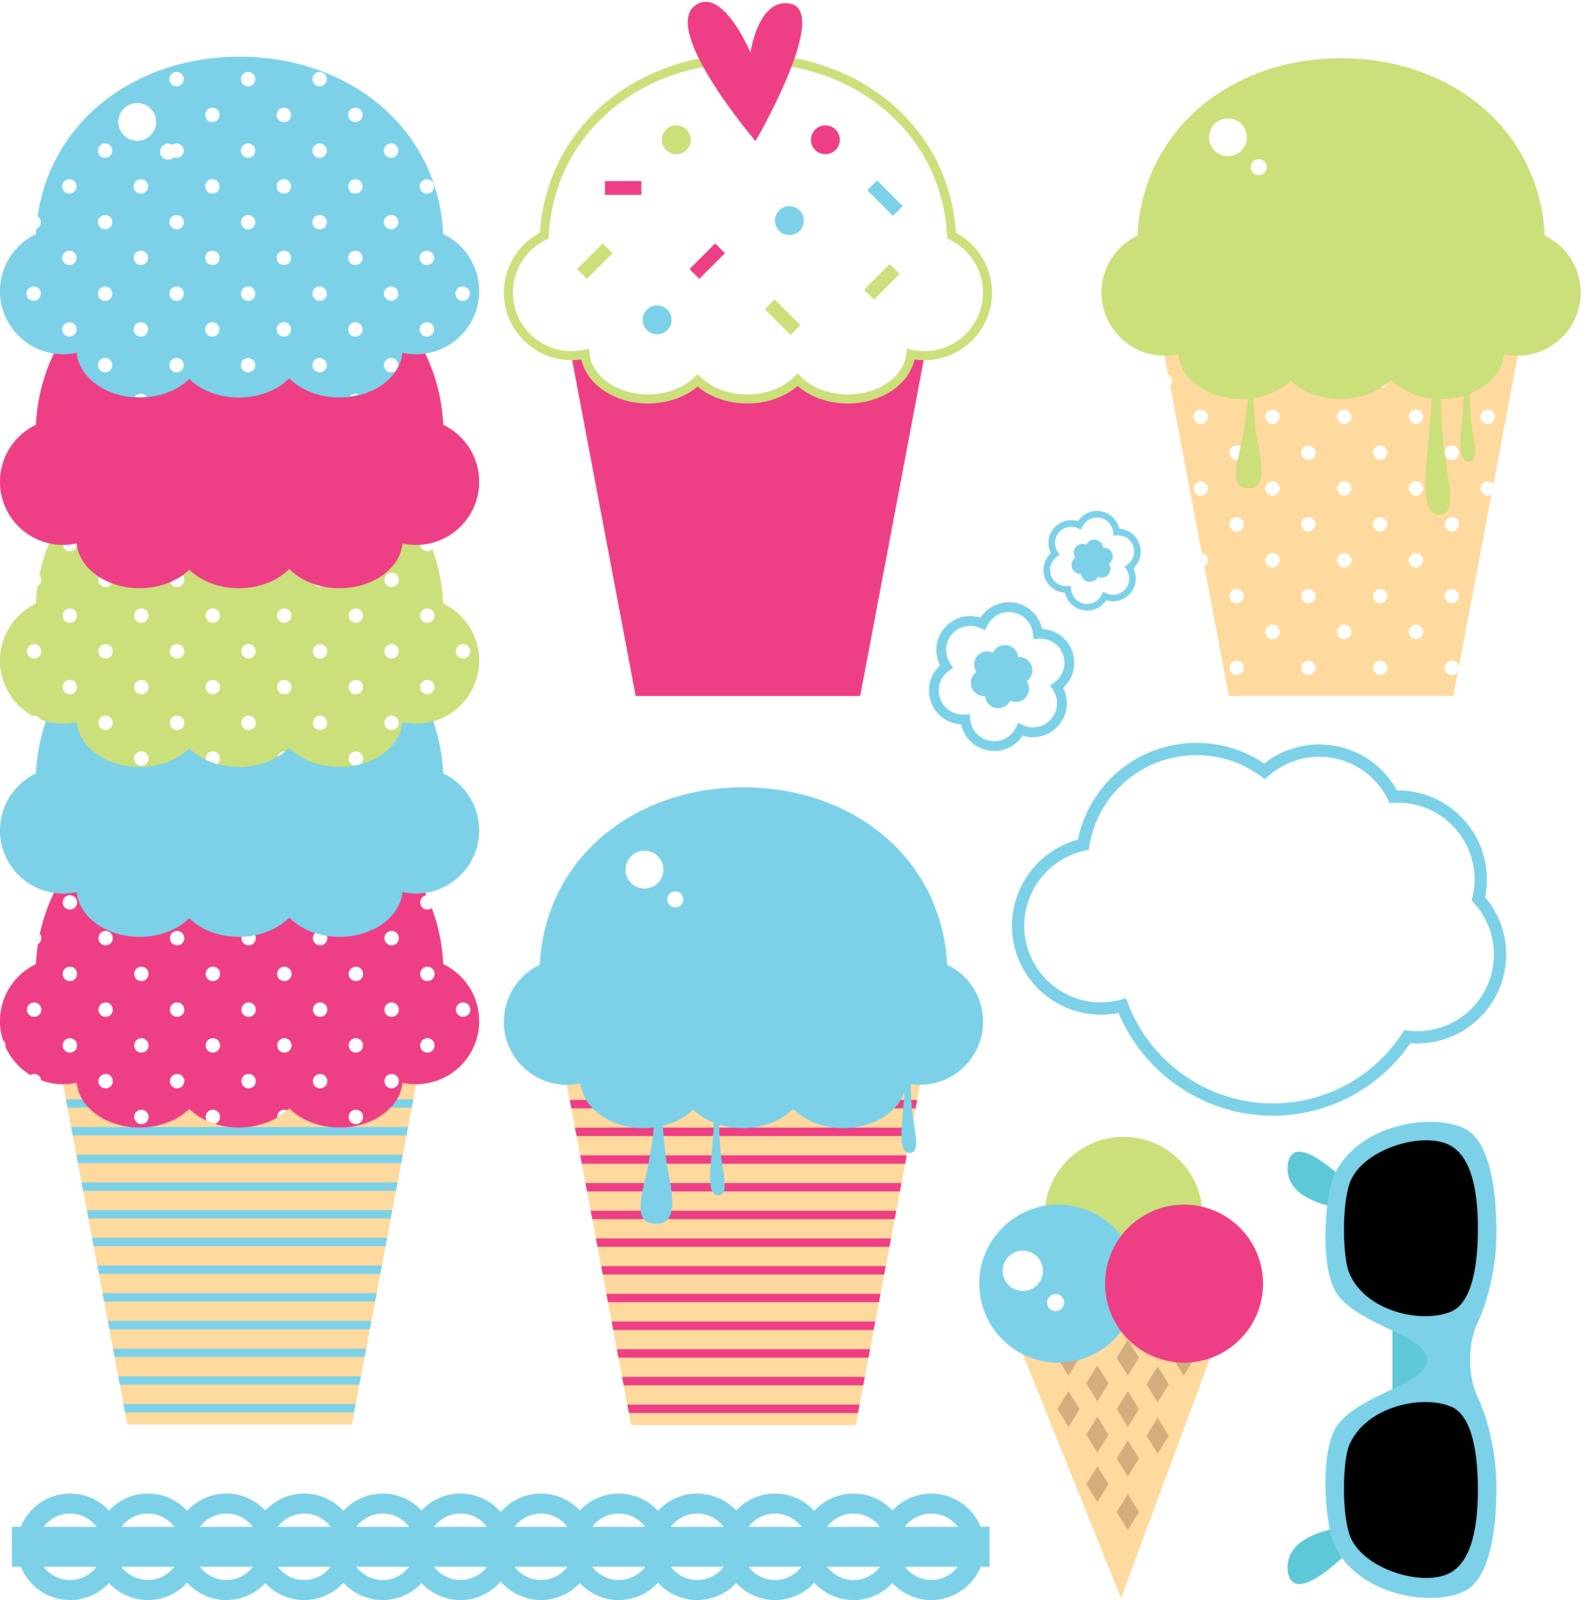 Beautiful ice cream collection in crazy colors. Vector Illustration